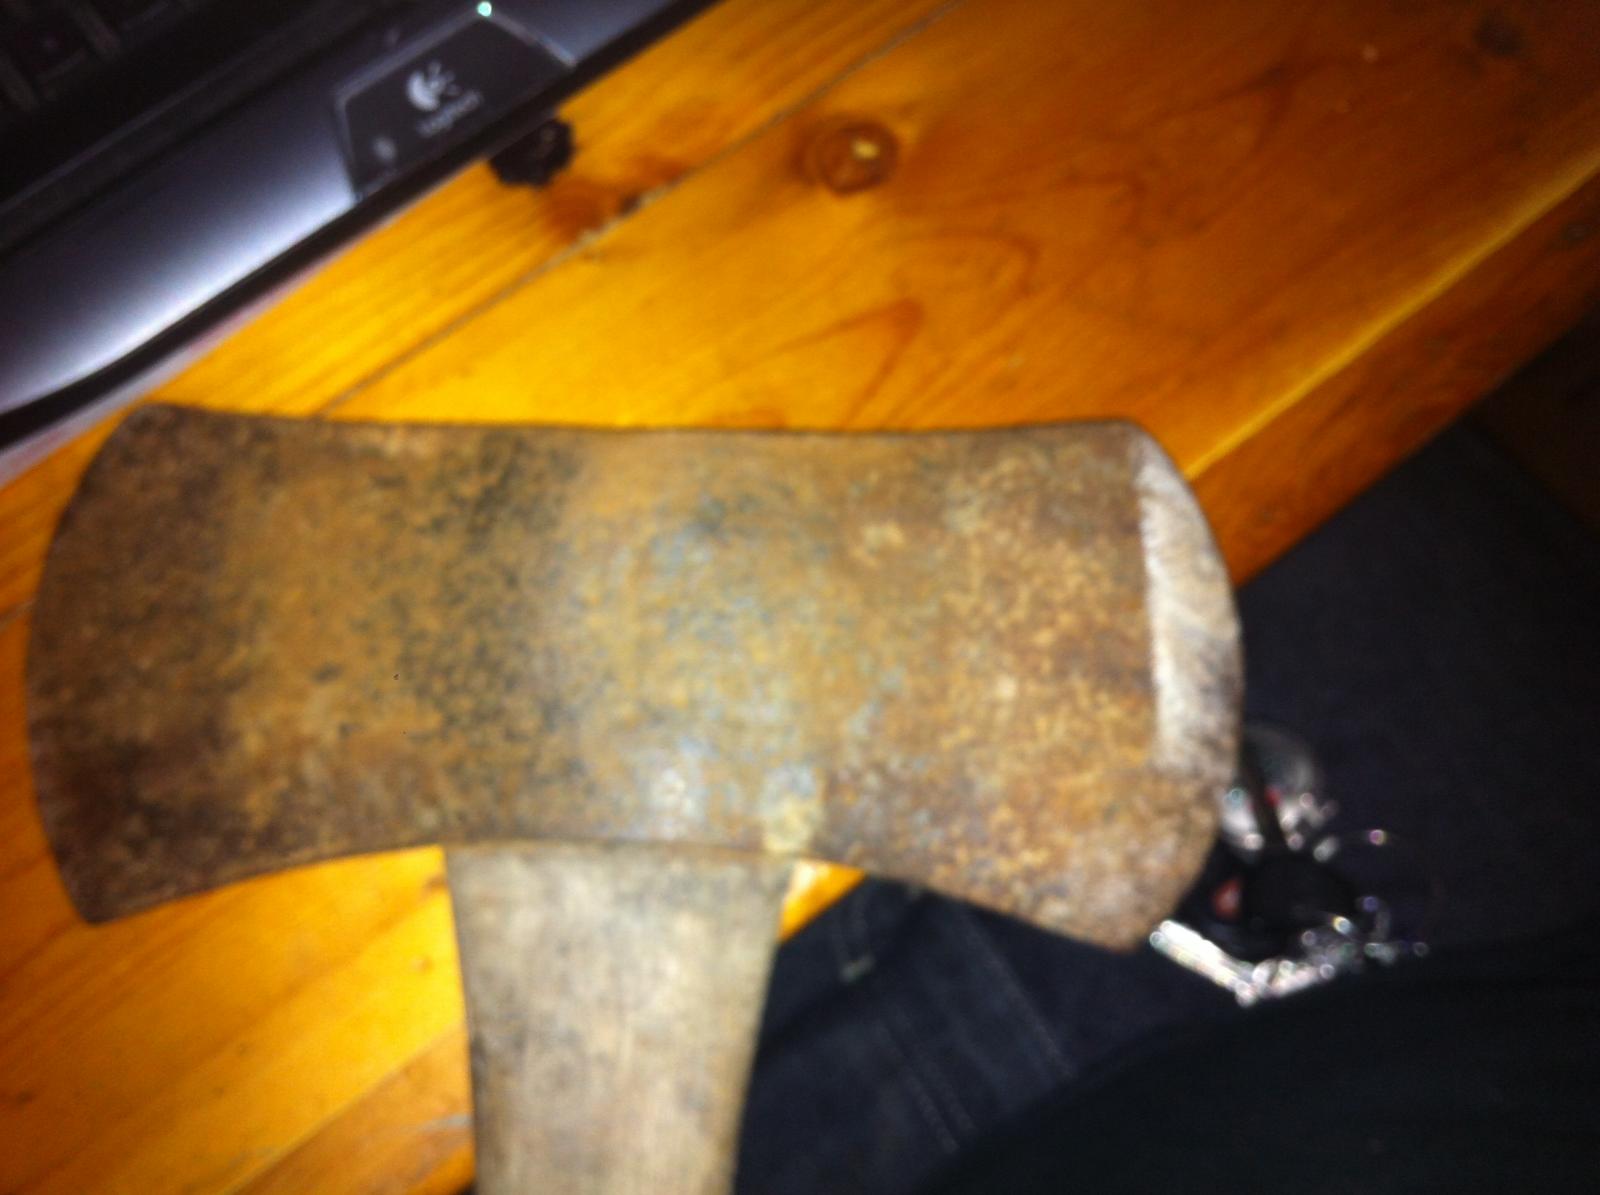 Just an axe I found